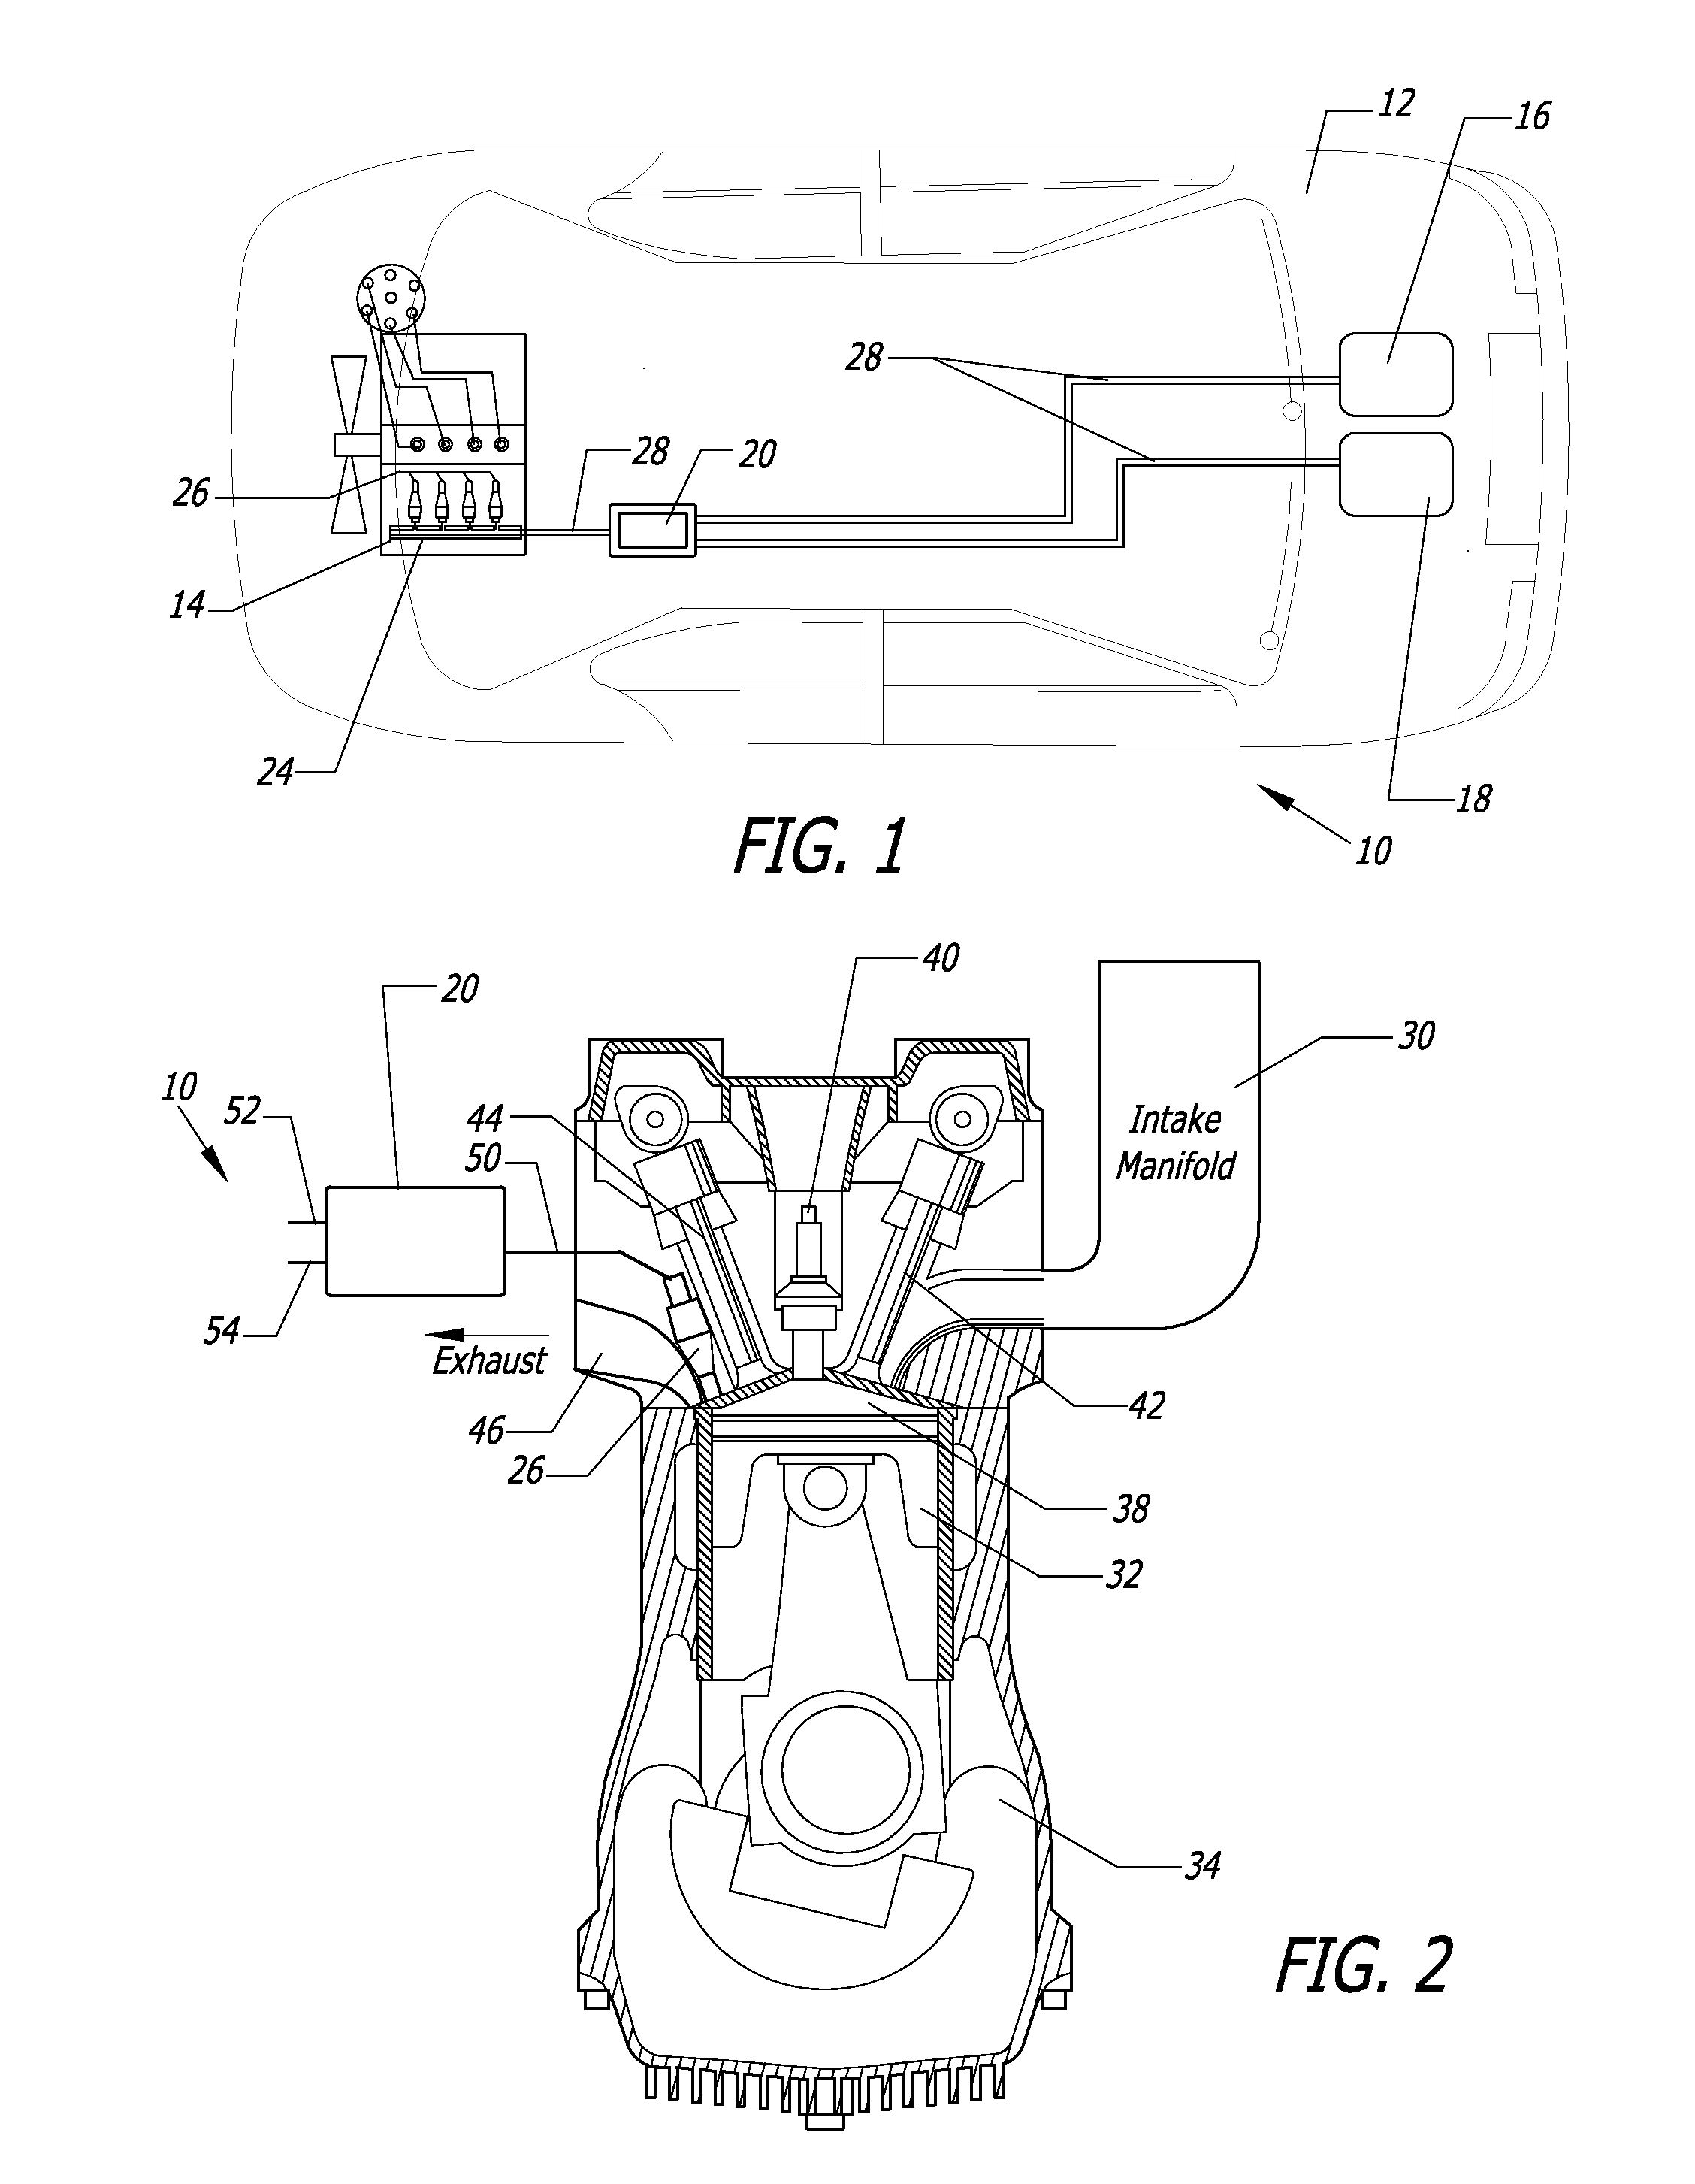 Multi-fuel system for internal combustion engines